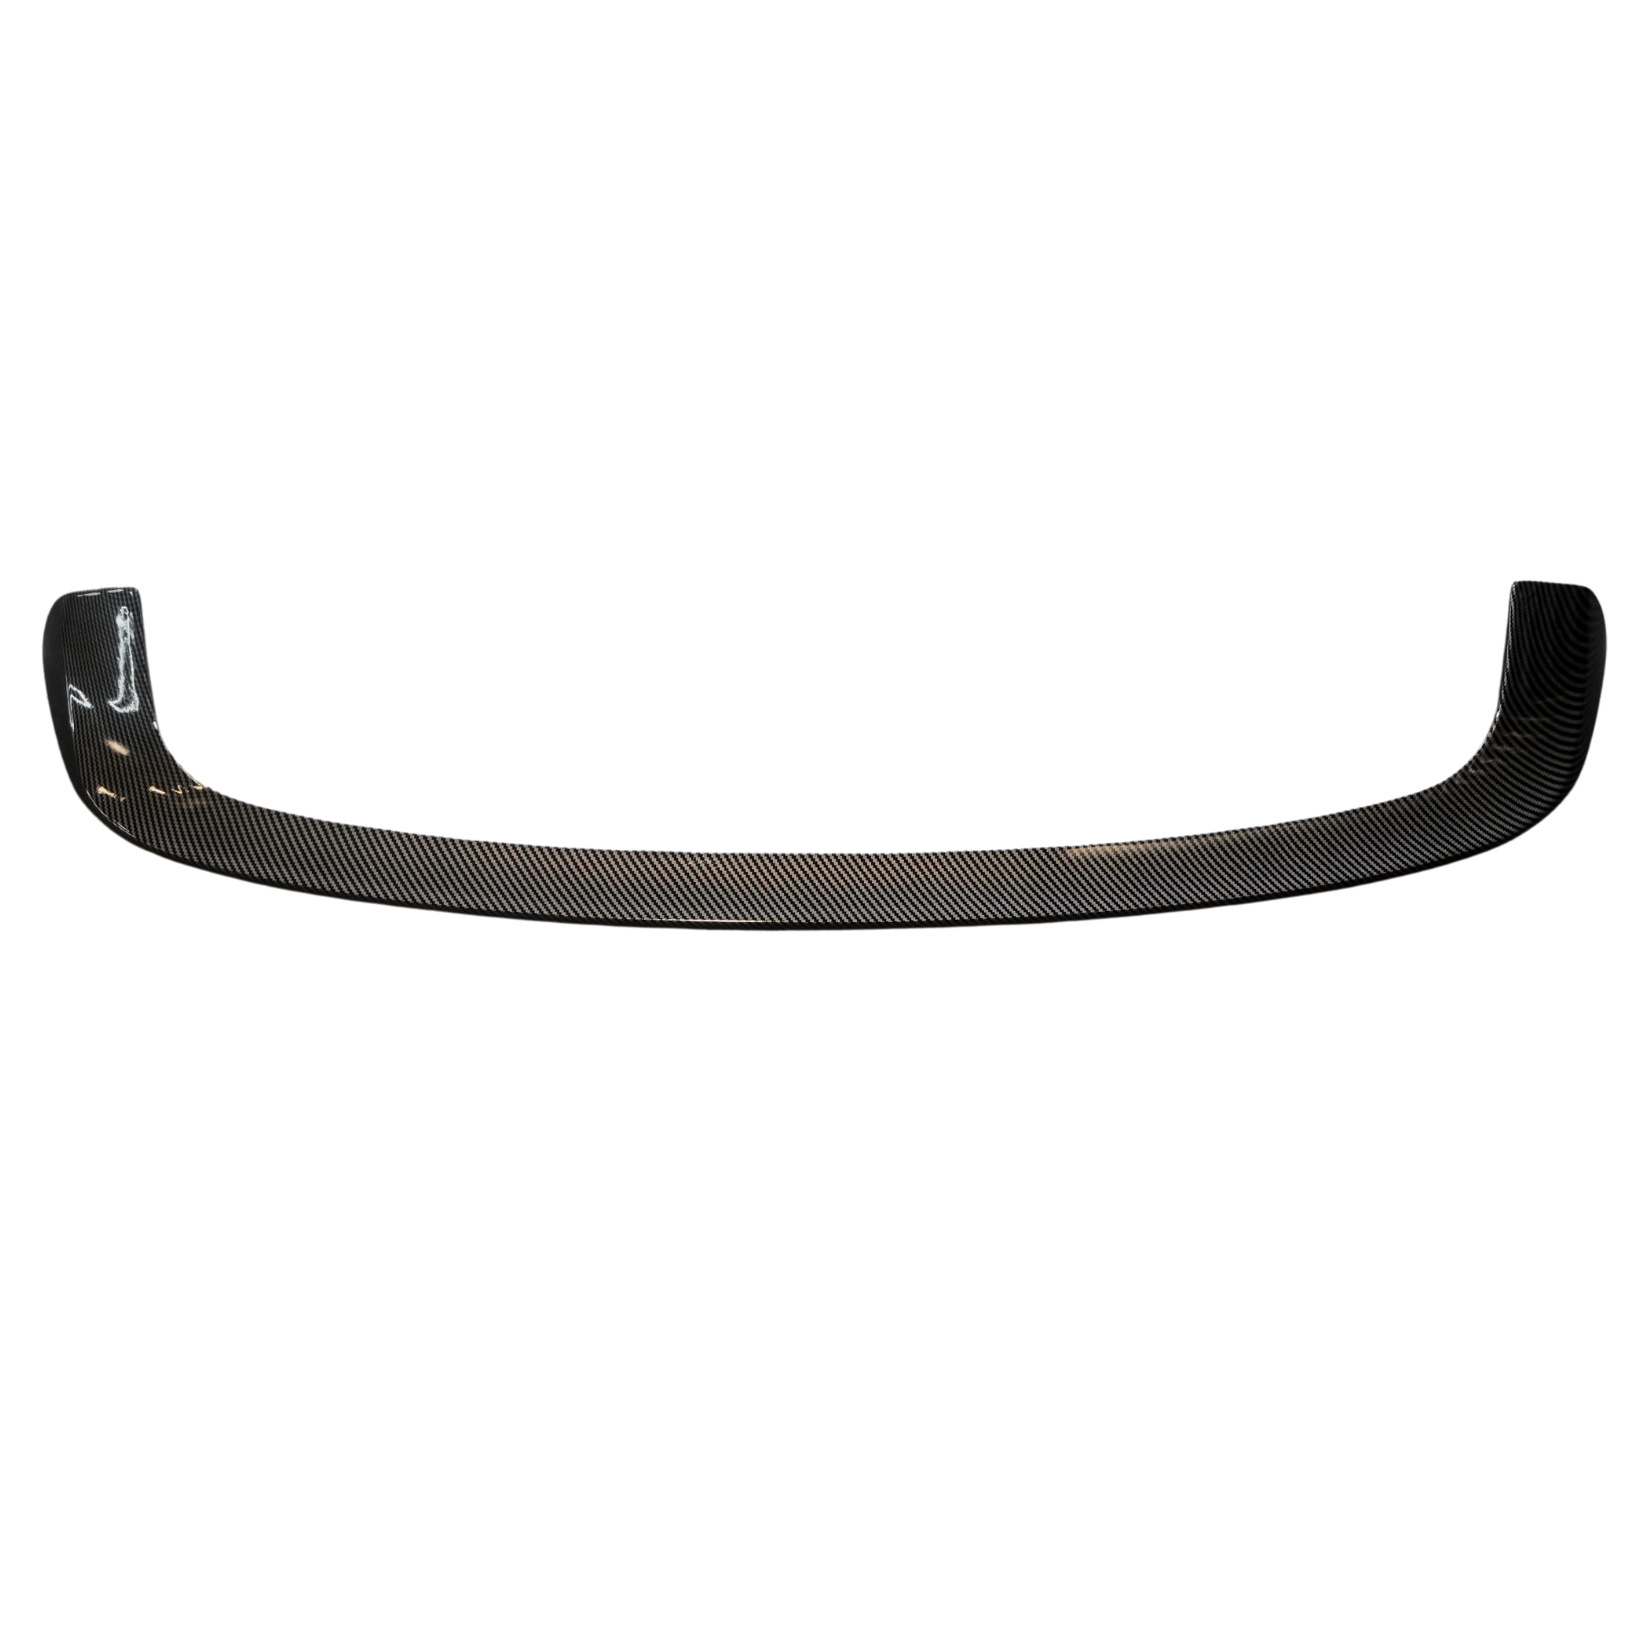 Bmw 1 Series F20 2011-2018 Rear Spoiler V2 In Carbon Look